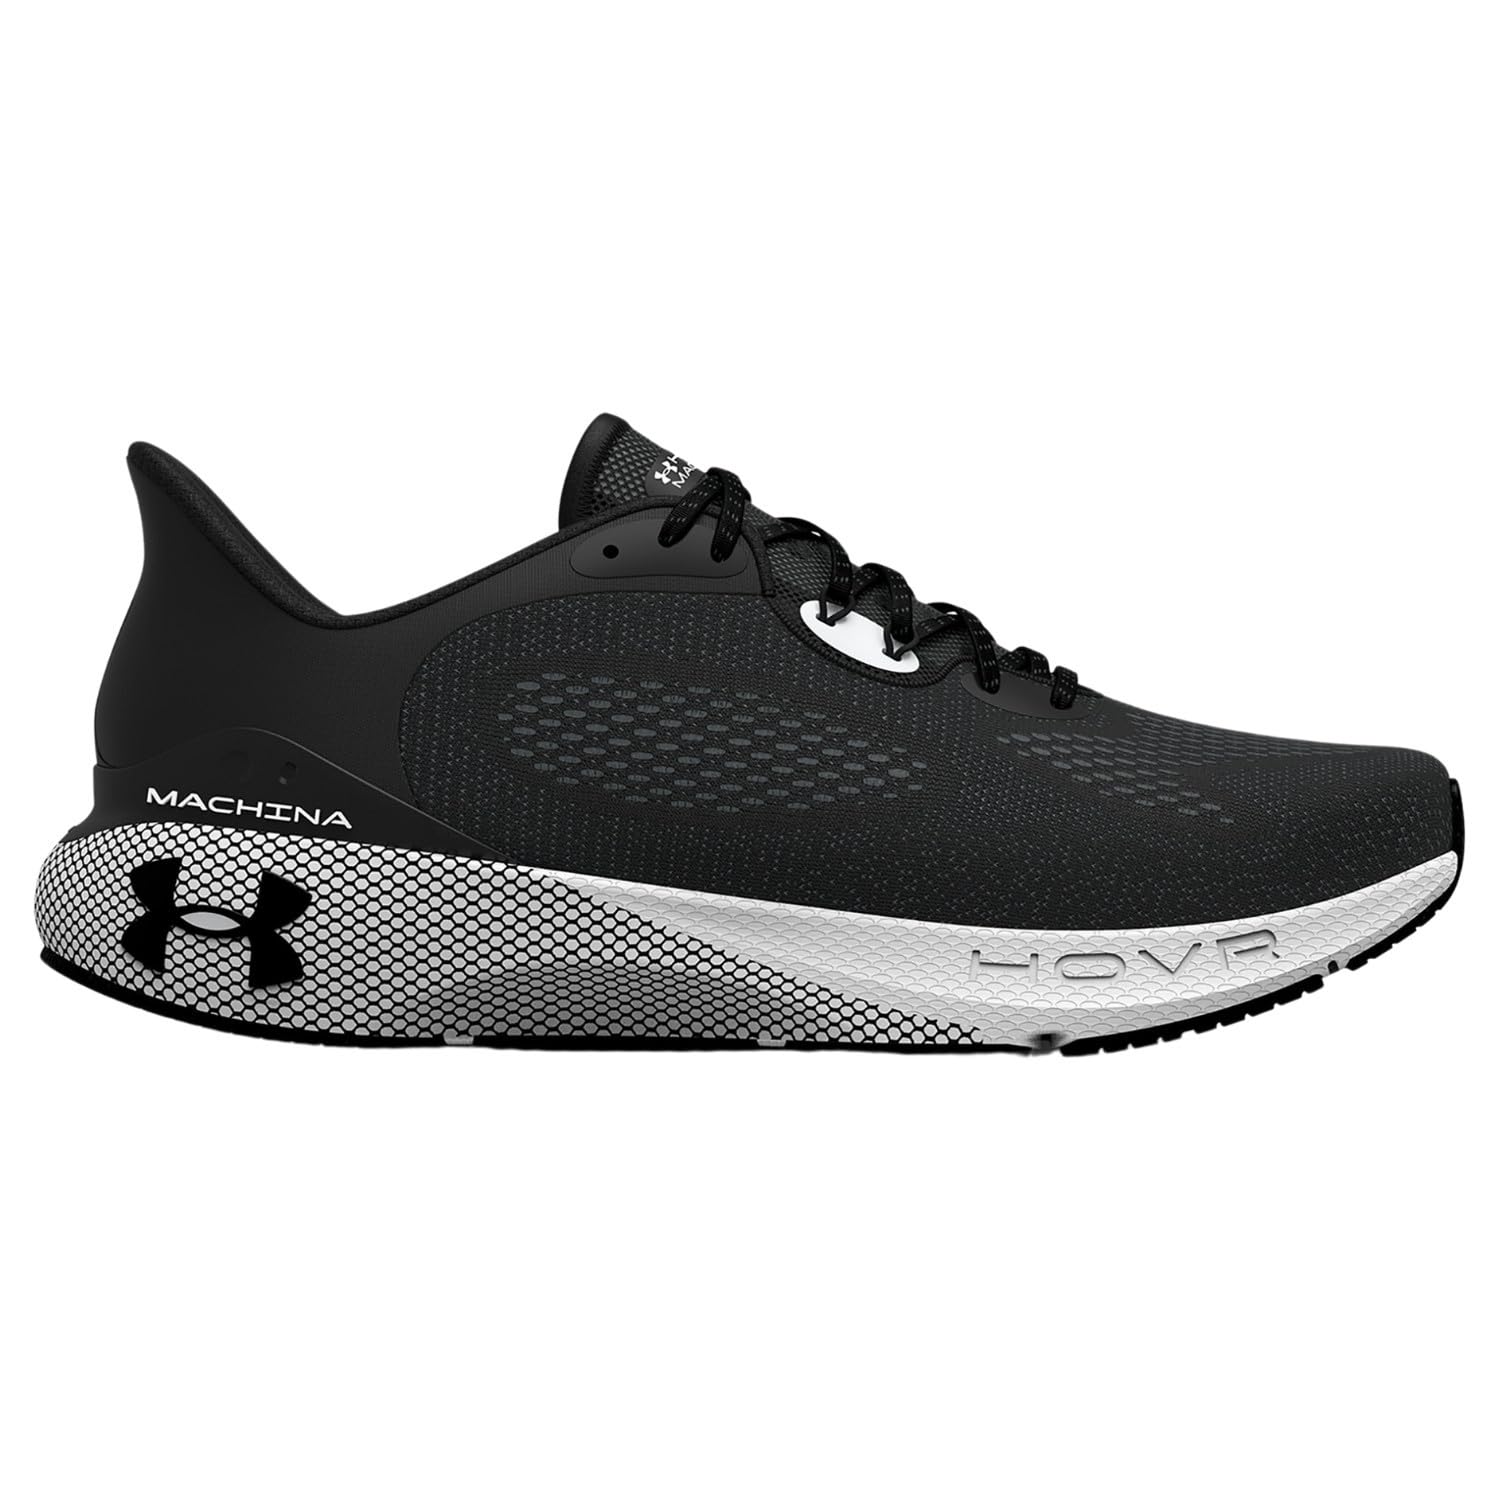 Under Armour Womens HOVR Machina 3 CN Synthetic Textile Black White Trainers 8 US